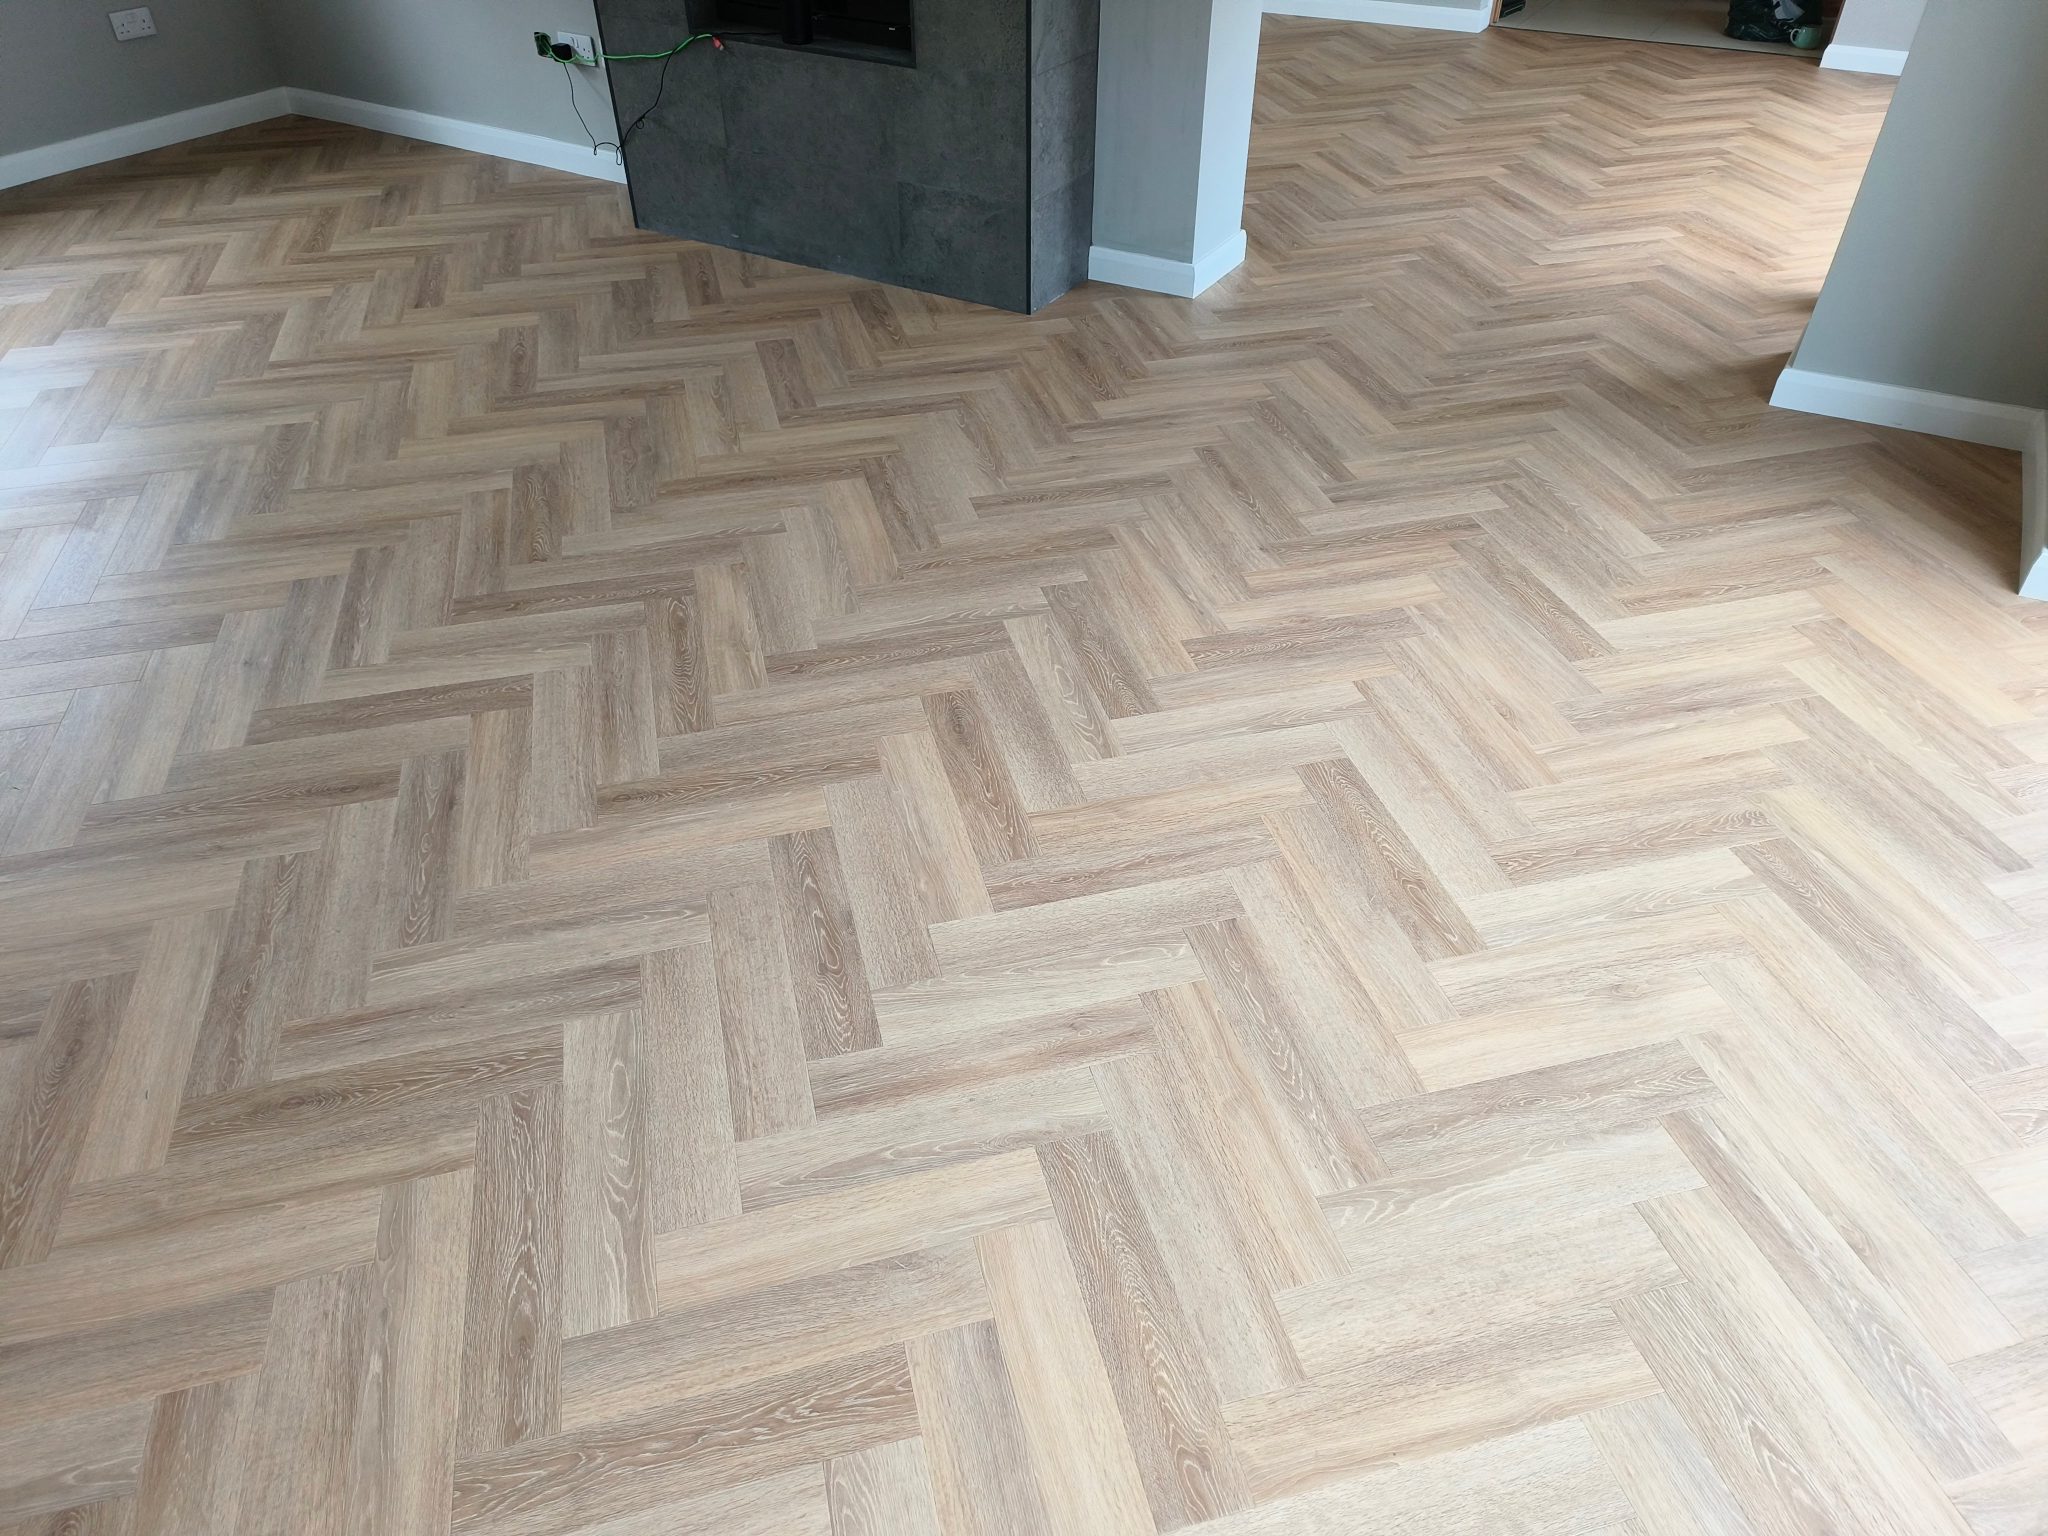 Image of a room with Herringbone Luxury Vinyl Tile (LVT) flooring. The tiles have a natural oak appearance, offering a classic and elegant wood look with the durability and ease of maintenance of vinyl.